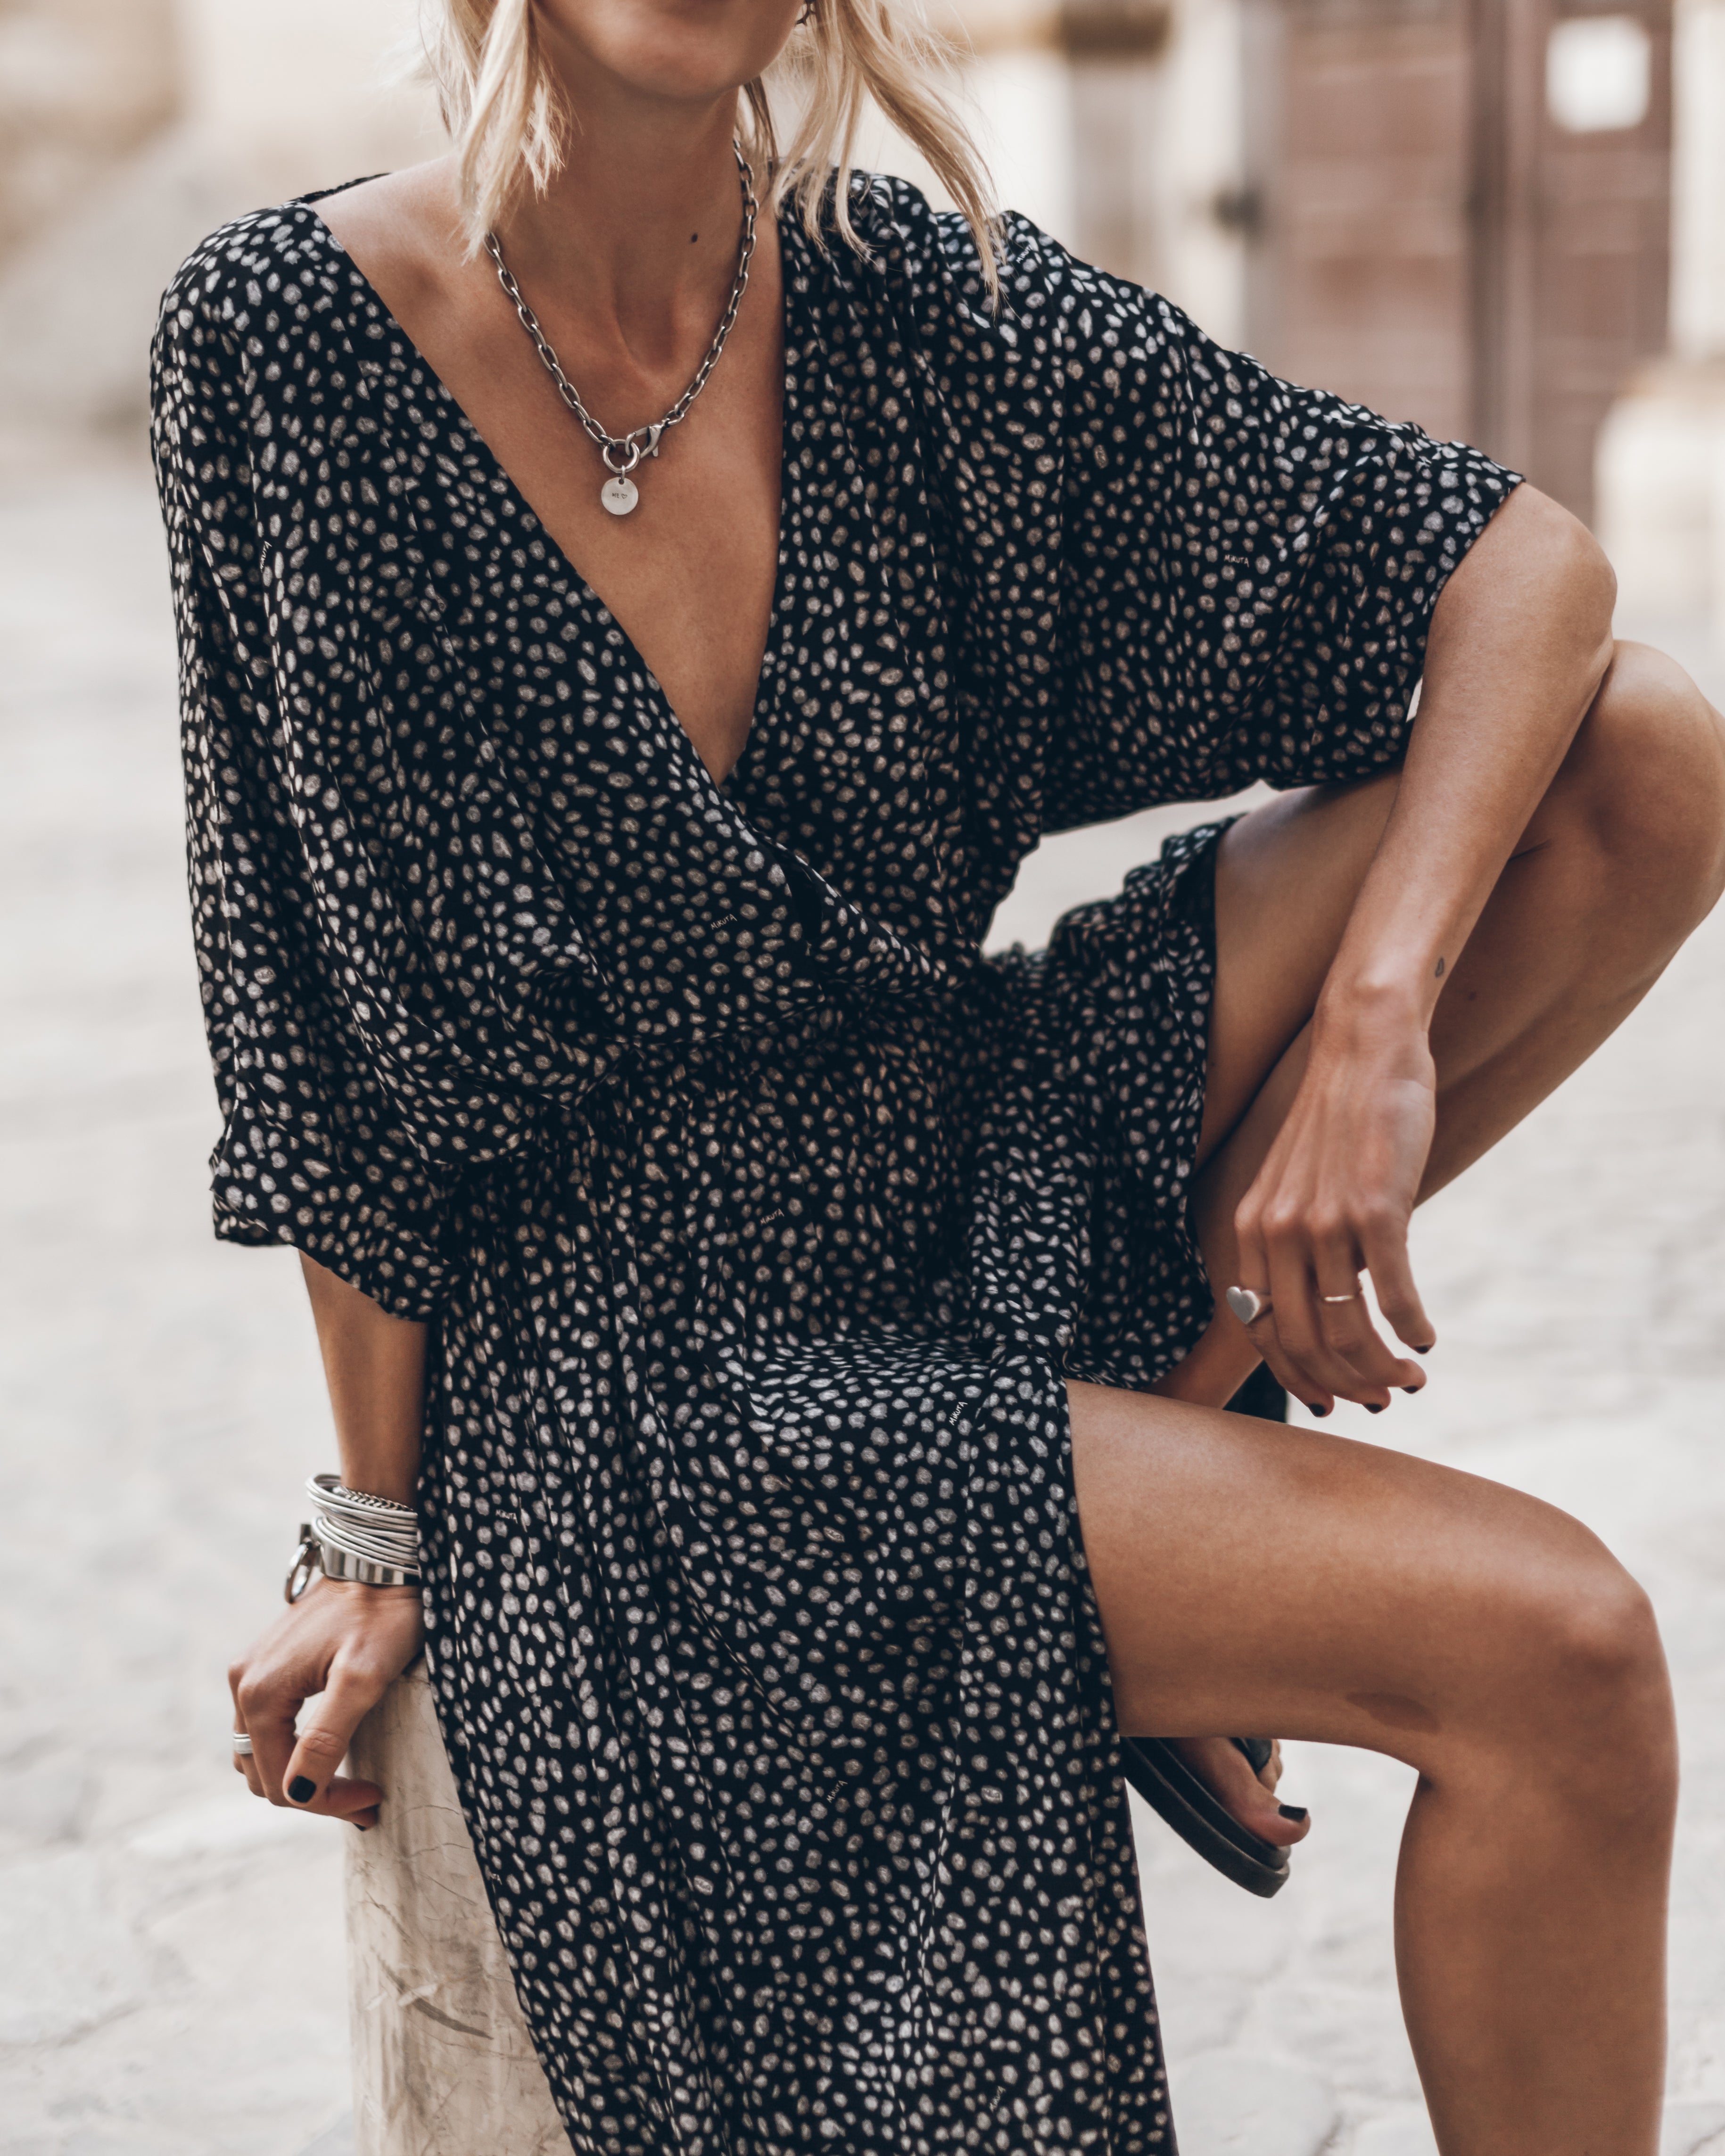 The Black Dotted Long Chill Dress